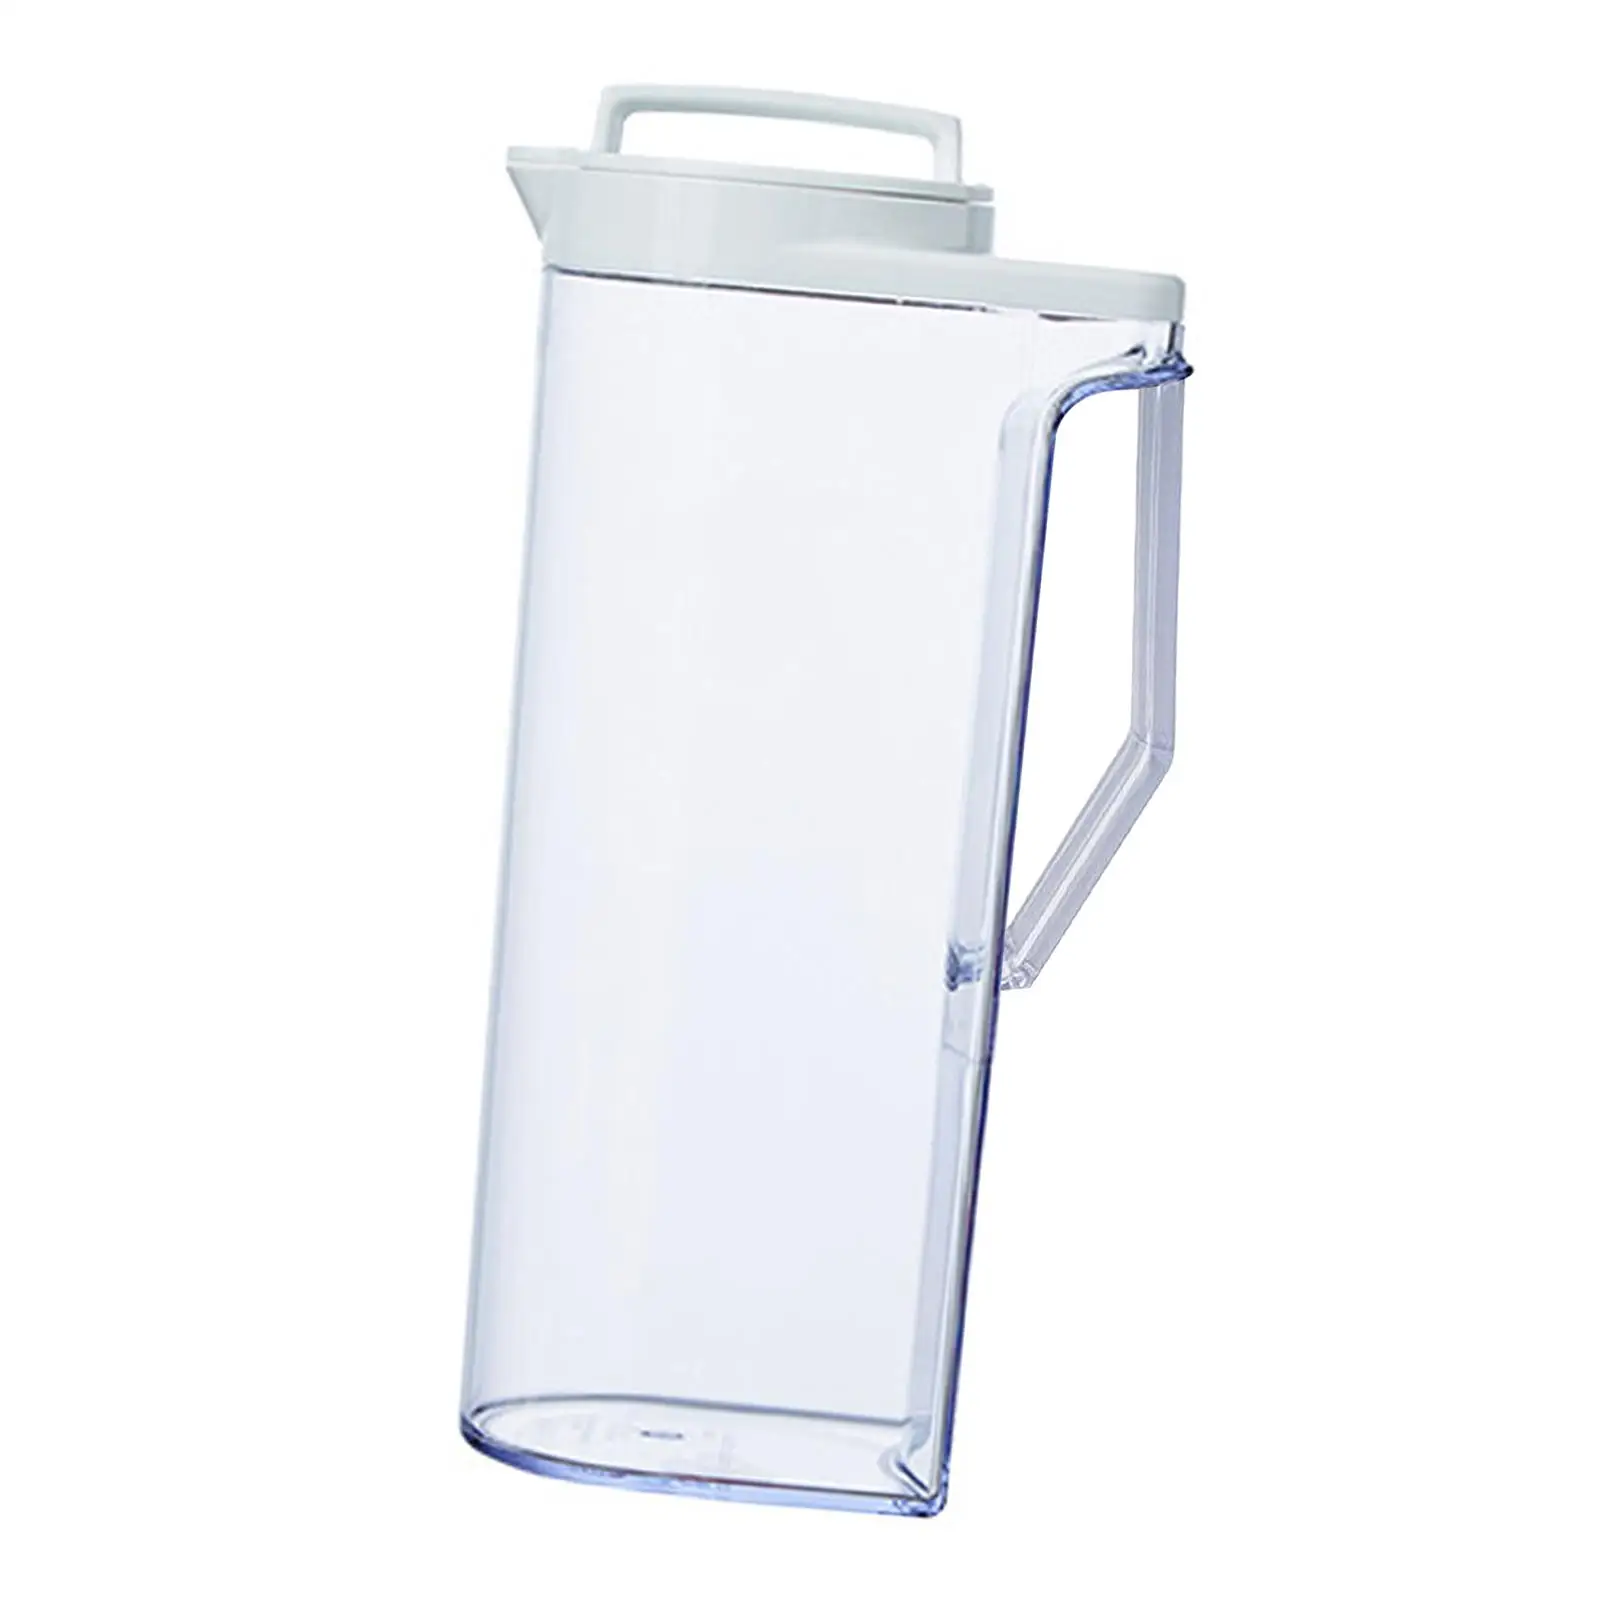 Water Pitcher with Double Handles, Household Teapot, Juice Beverage Dispenser with Lid and Spout, Iced Tea Pitcher Jug